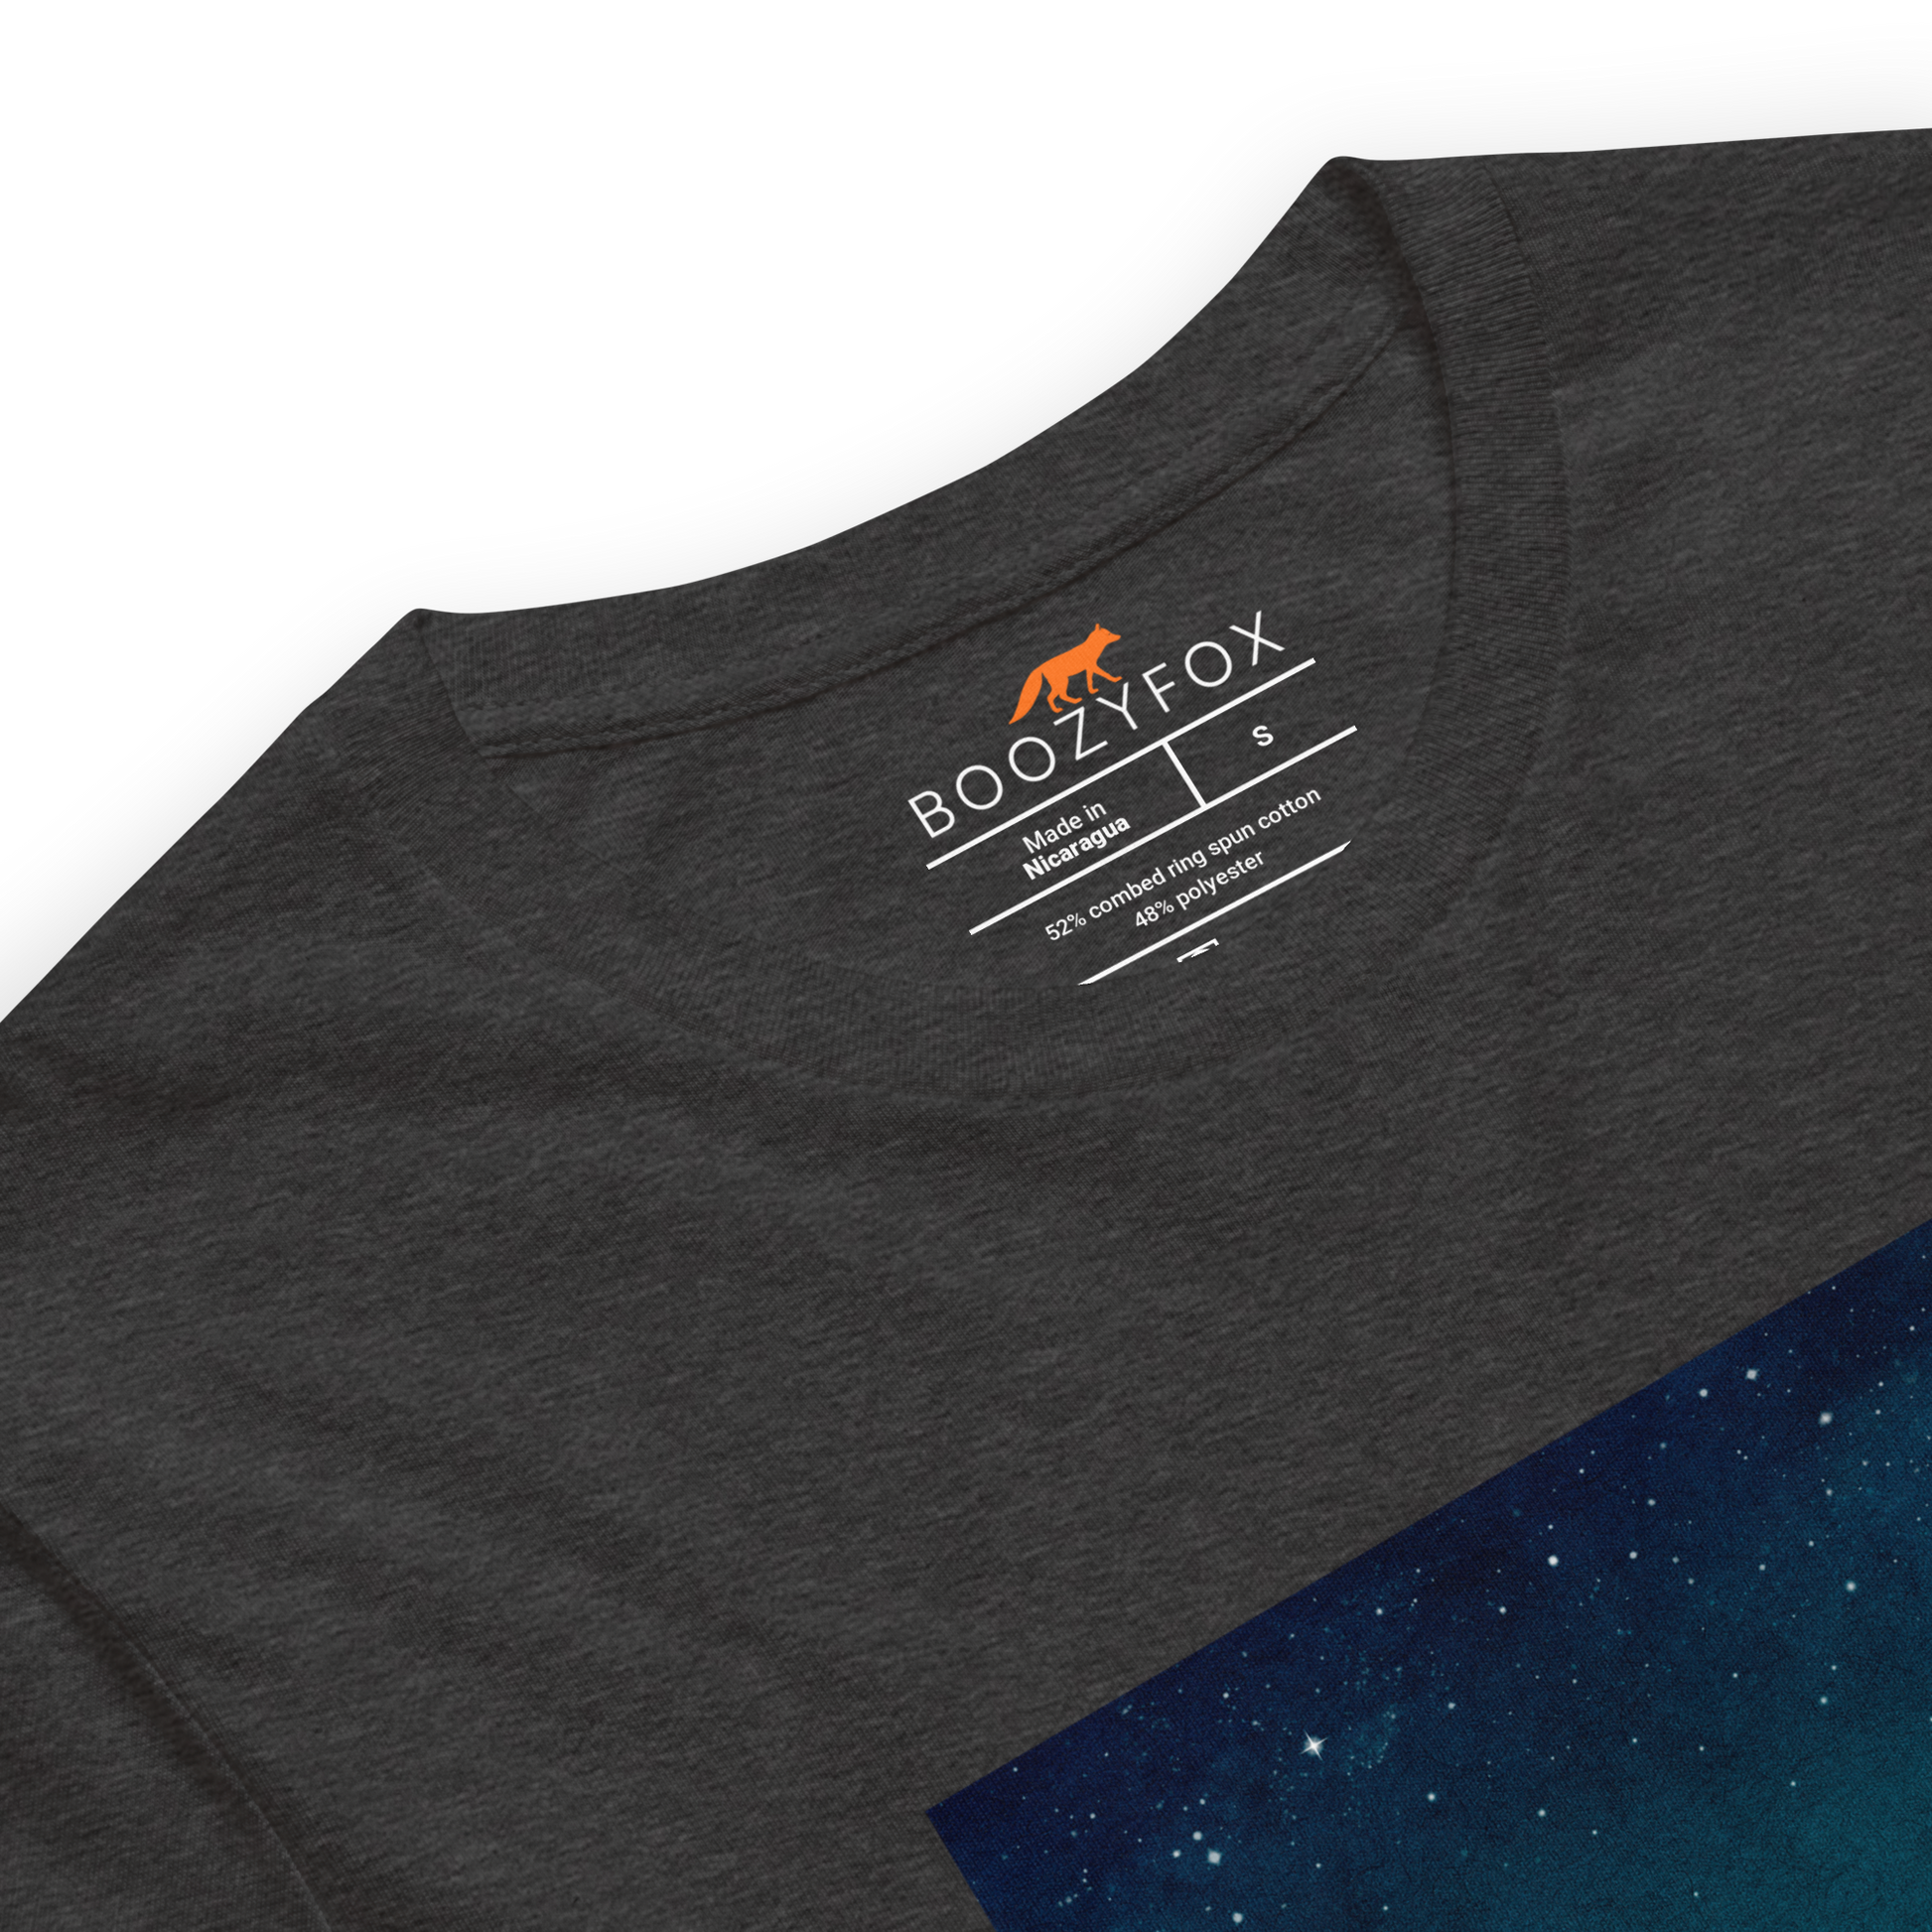 Product details of a Dark Grey Heather Premium Whale T-Shirt featuring a majestic Whale Under The Moon graphic on the chest - Cool Graphic Whale Tees - Boozy Fox